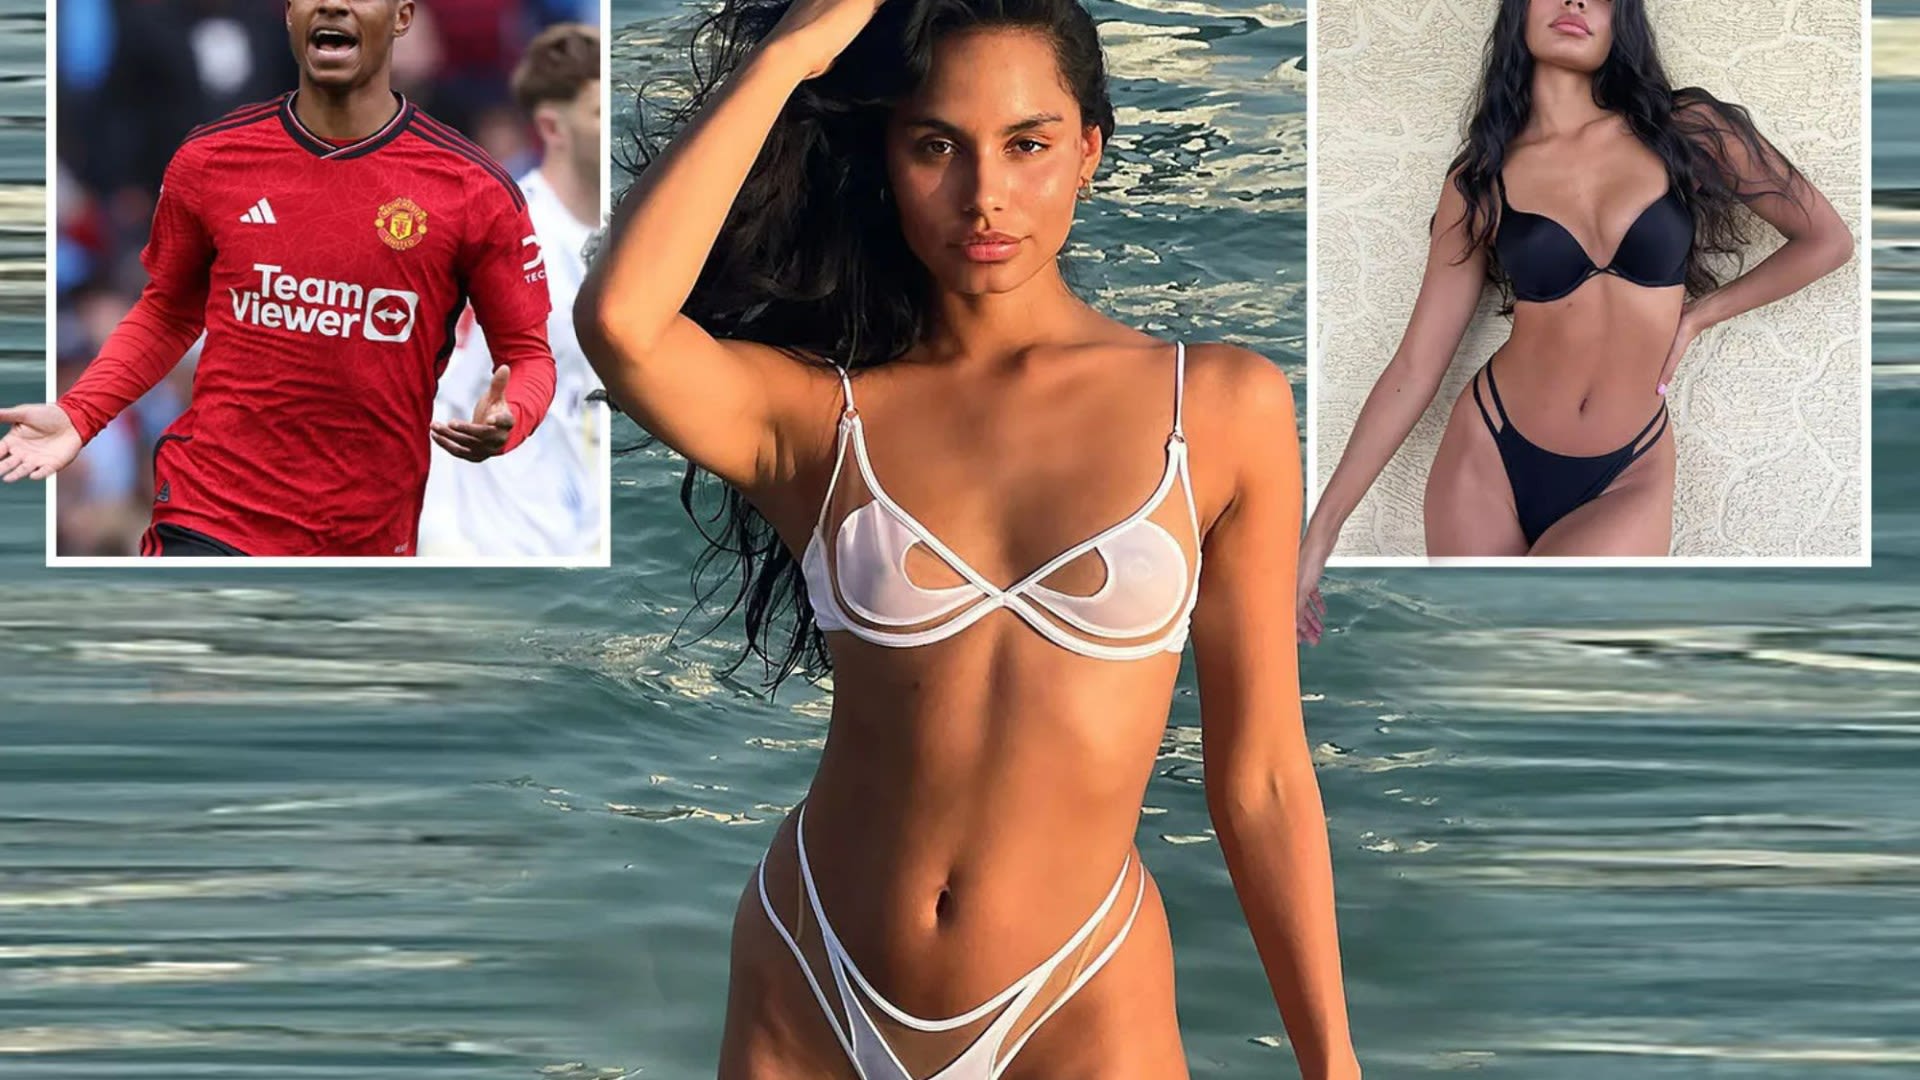 Marcus Rashford grows close to Colombian model after cosying up at nightclub